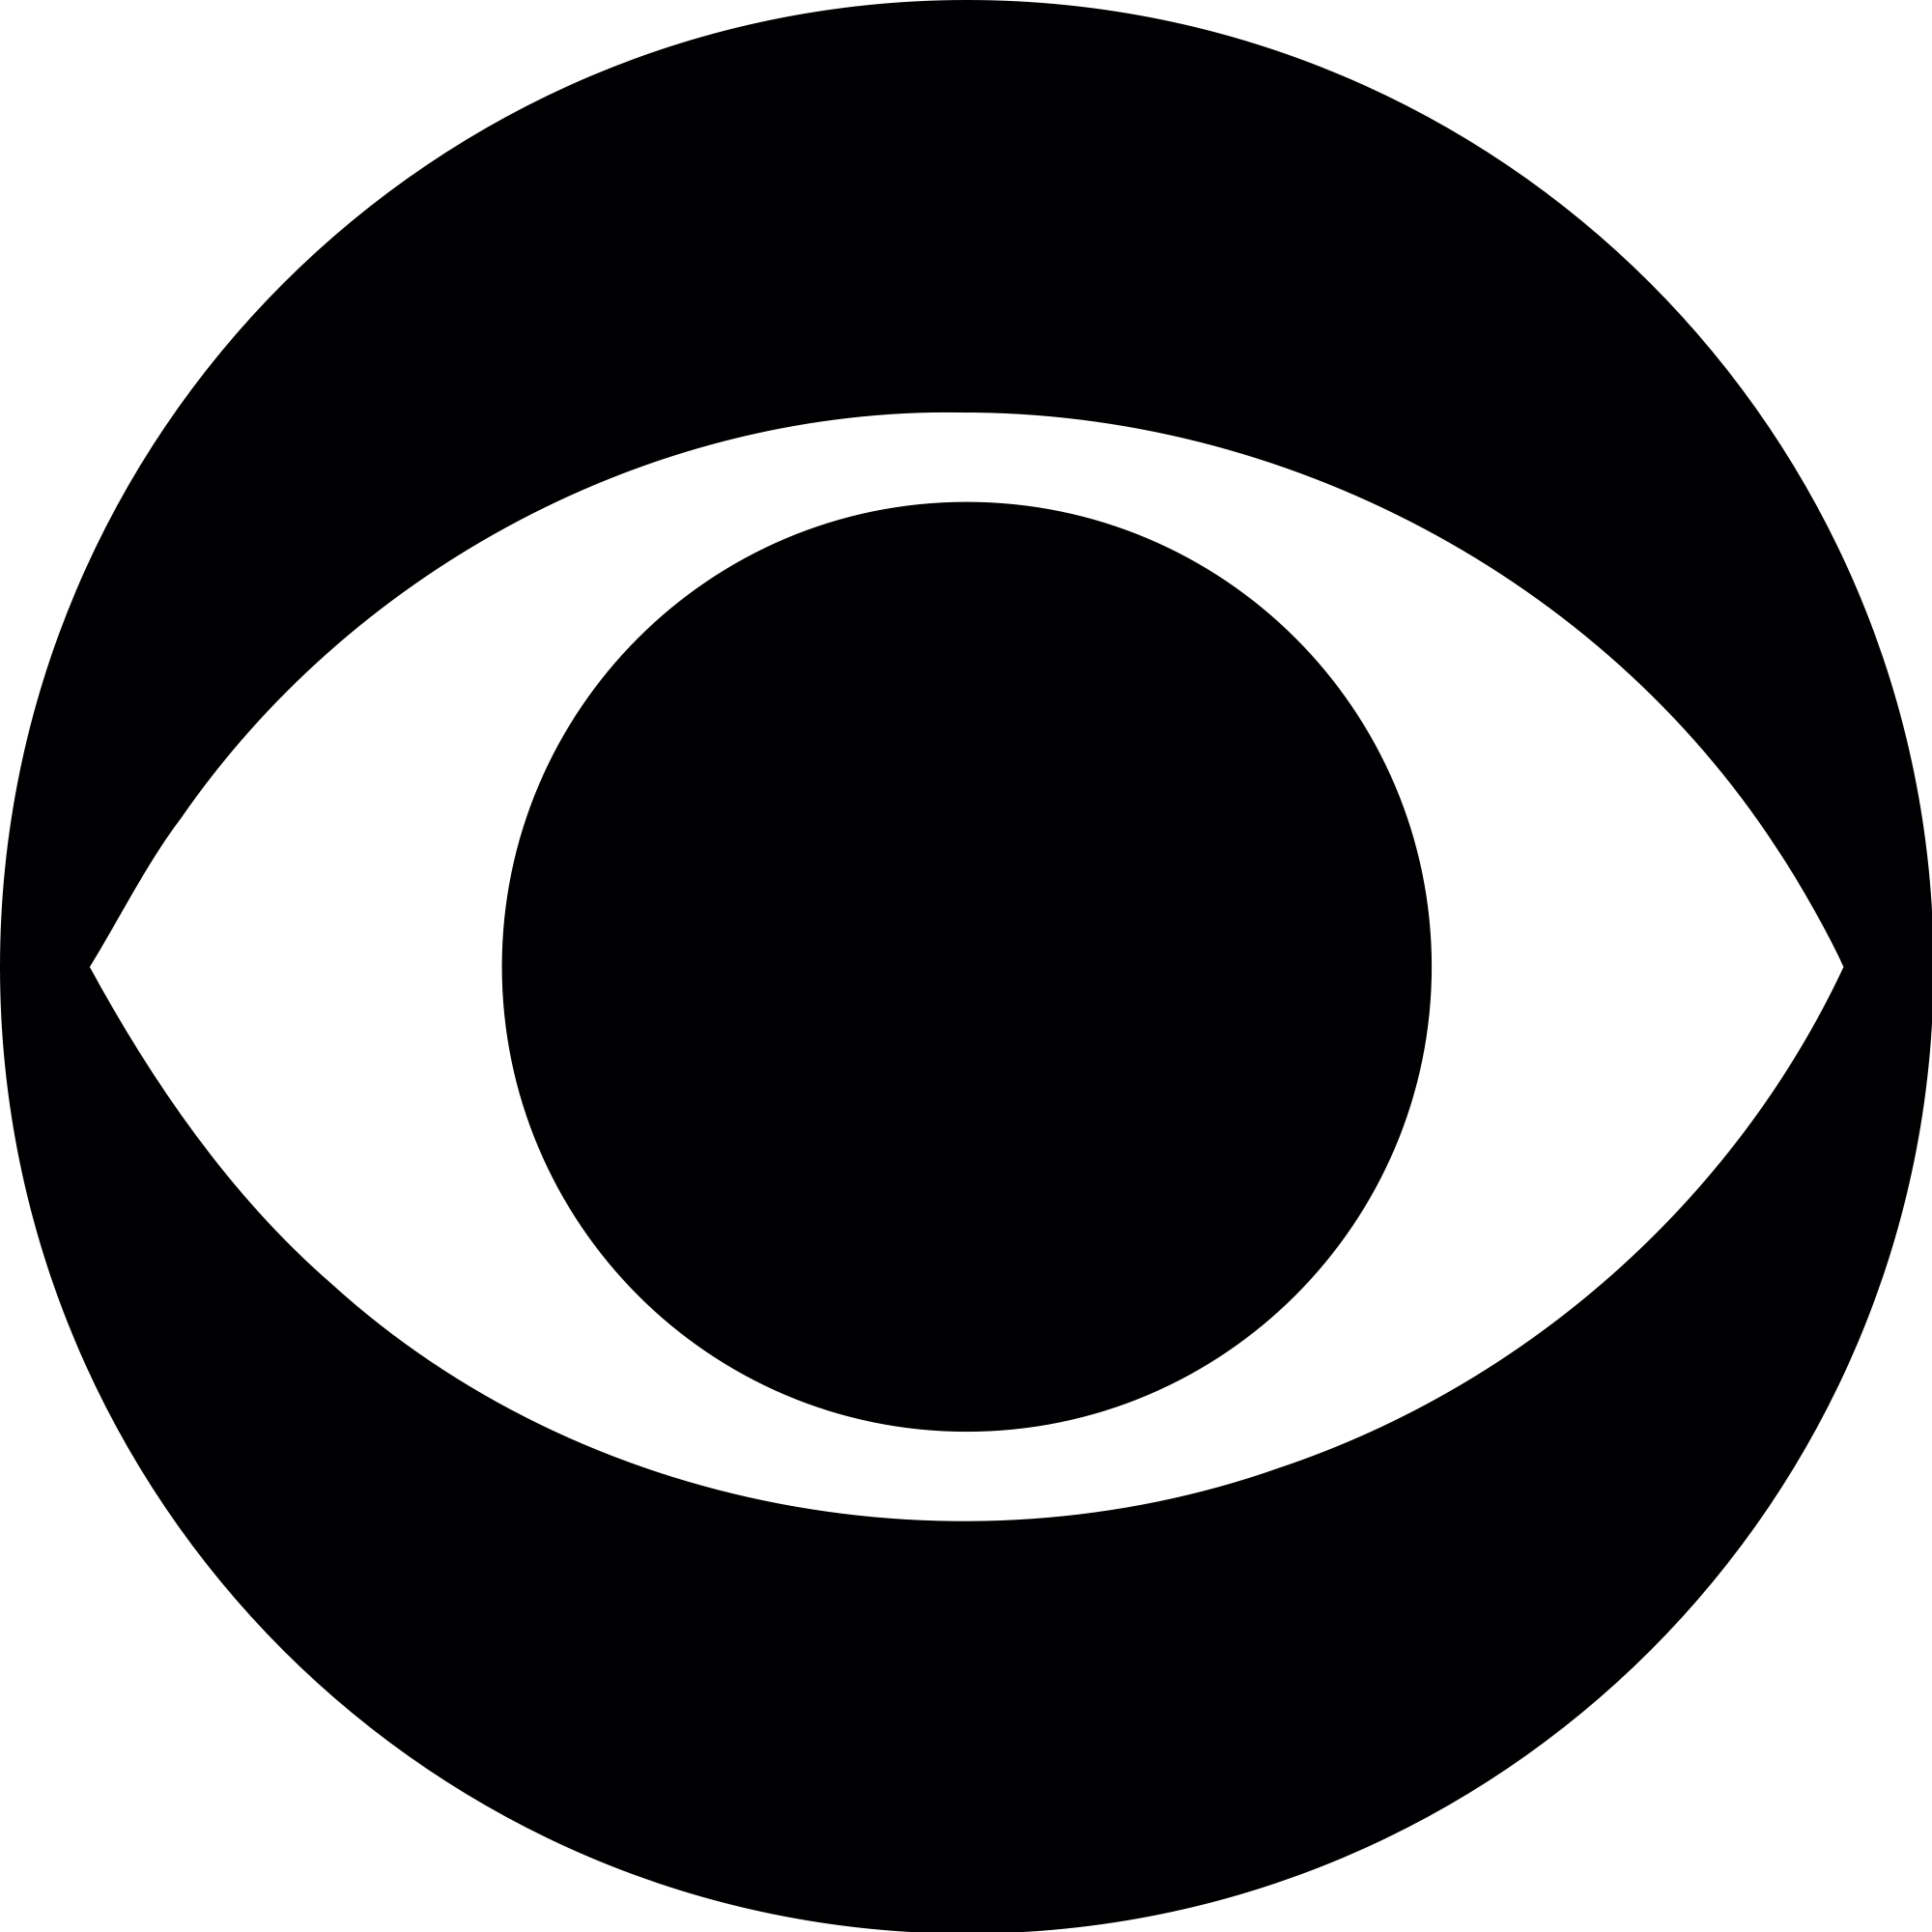 CBS Eye Logo - was introduced in the early 1950s. Since its introduction, the eye itself has remained unchanged